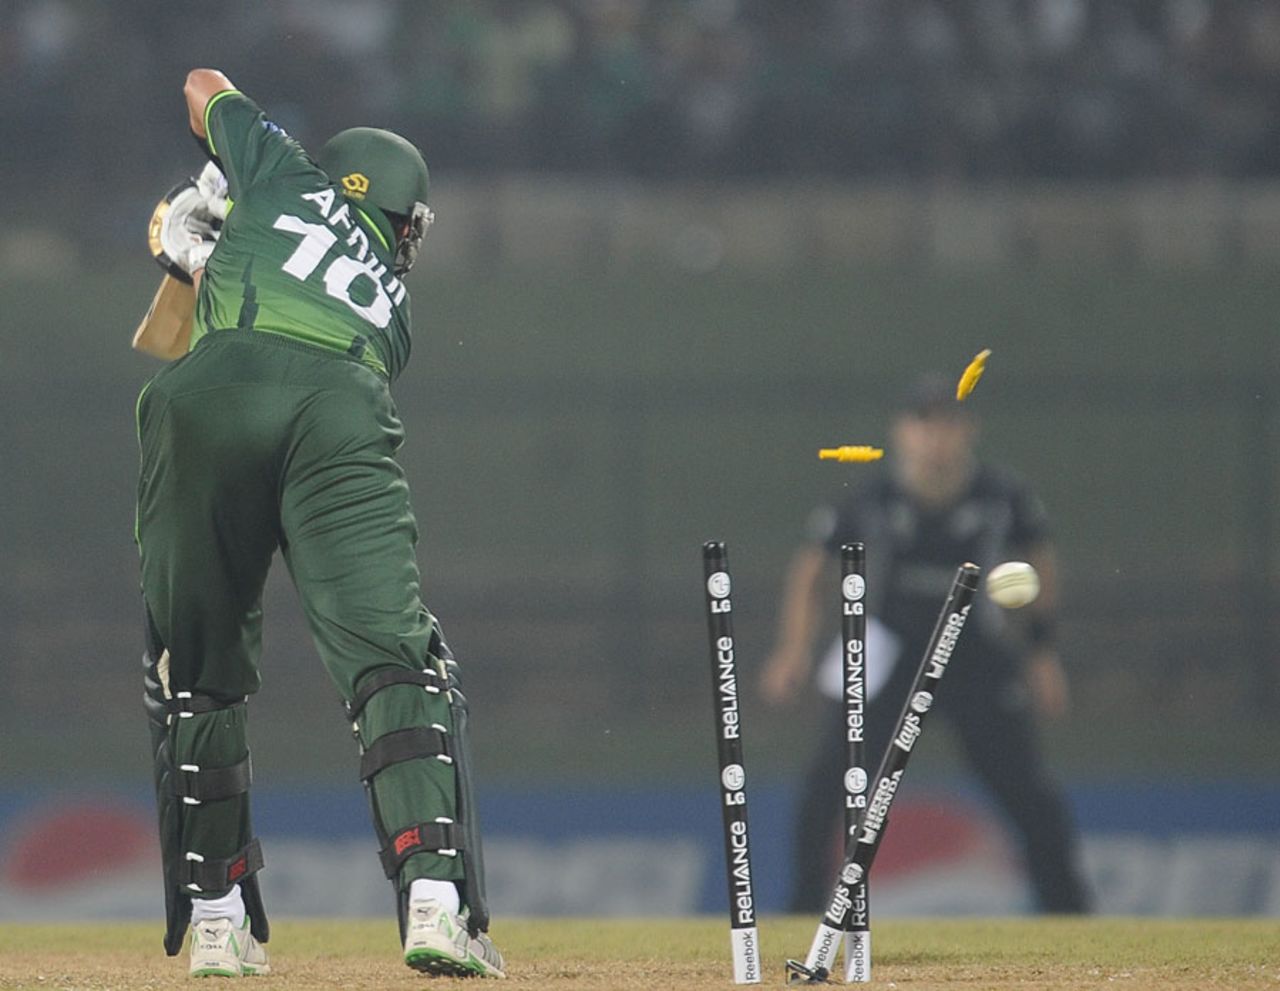 Shahid Afridi was bowled by Jacob Oram for 17, New Zealand v Pakistan, Group A, World Cup, Pallekele, March 8, 2011